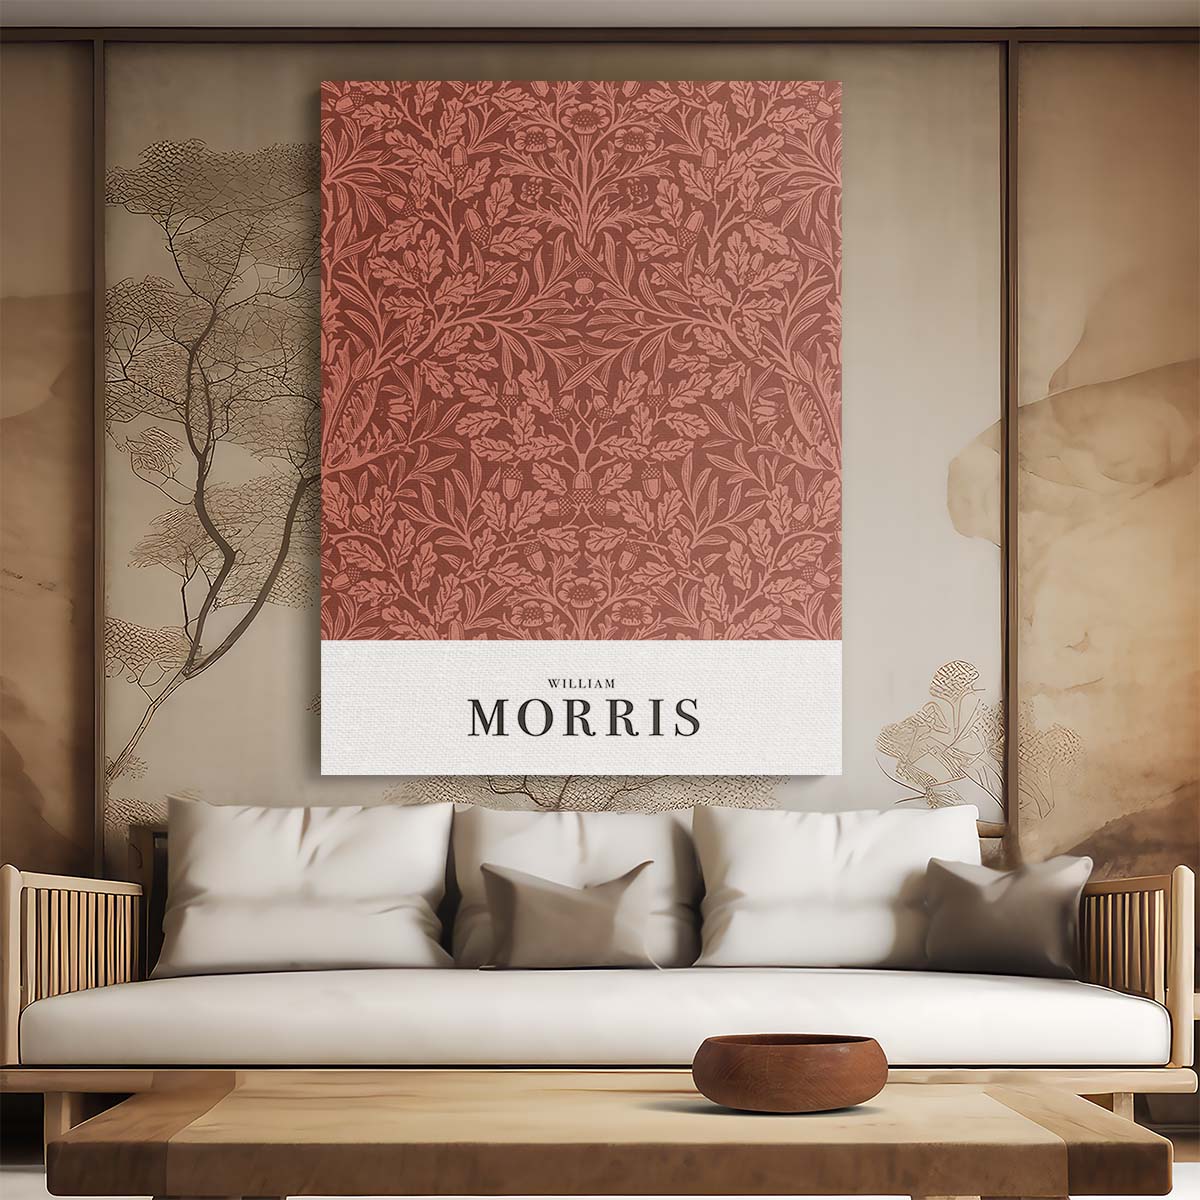 William Morris Red Acorn Oak Leaf Floral Typography Illustration Poster by Luxuriance Designs, made in USA